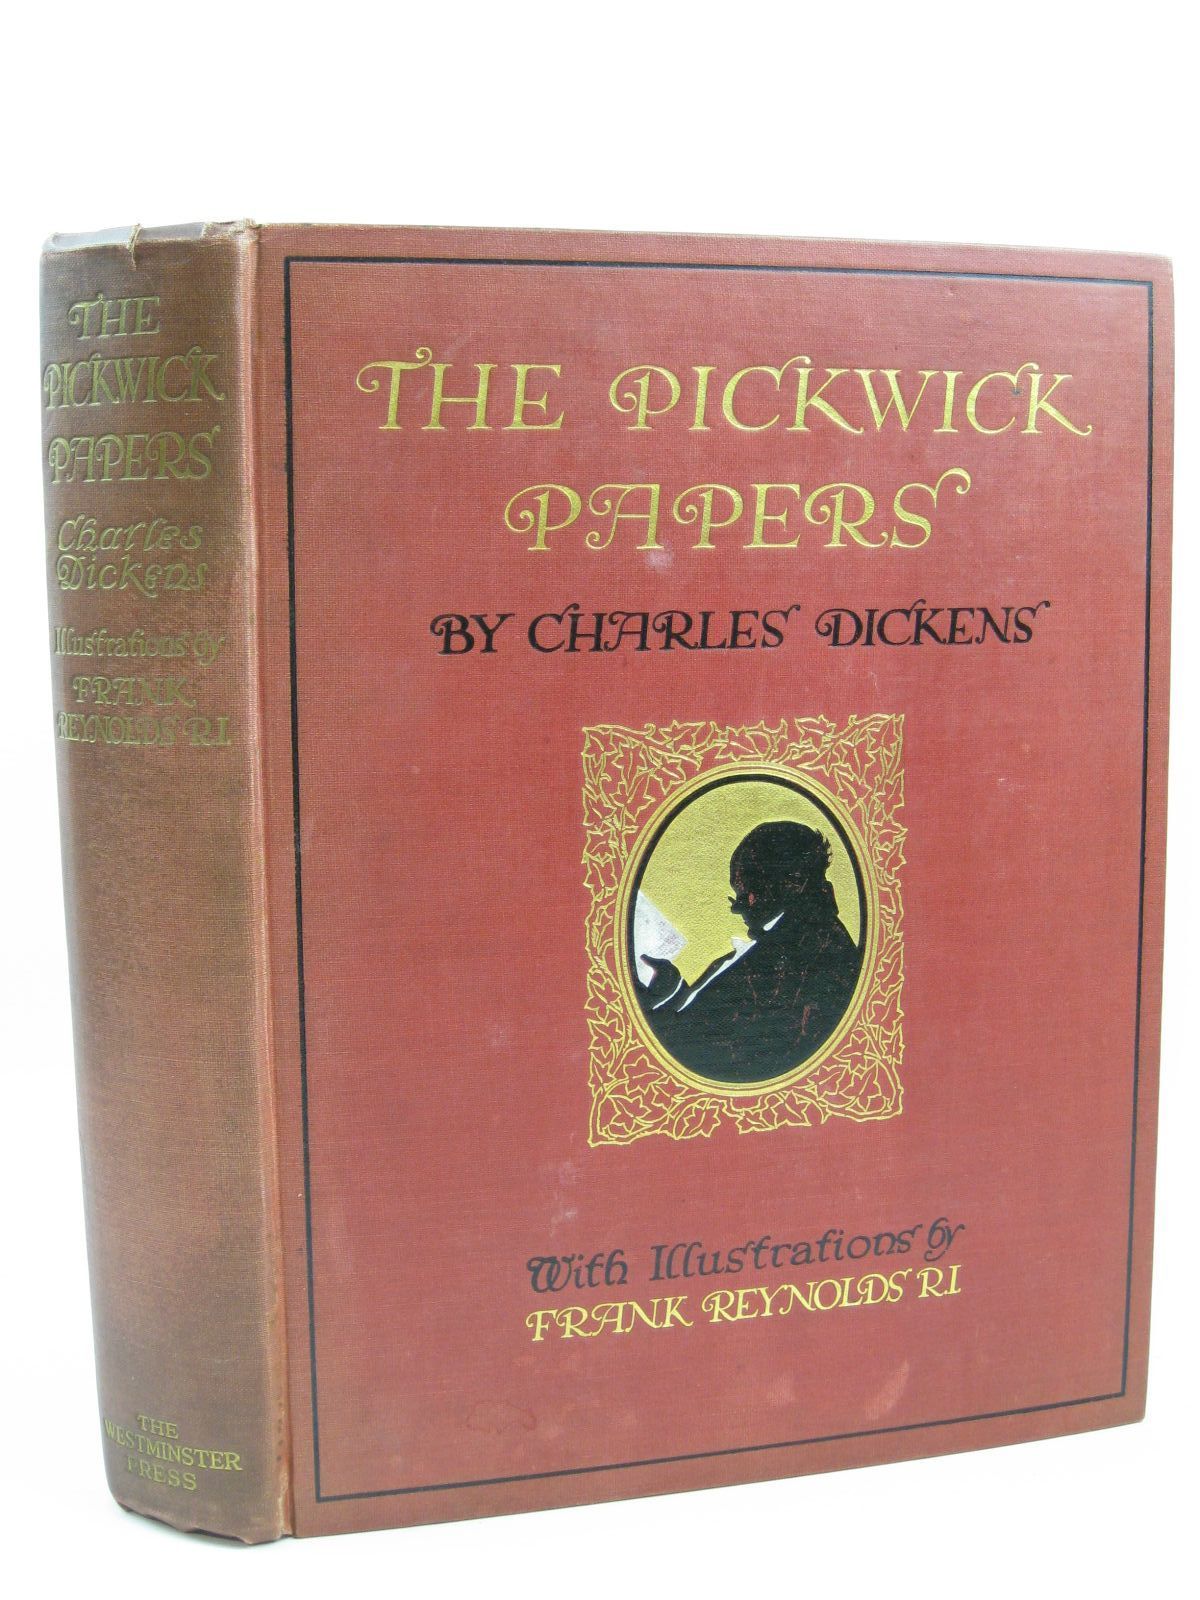 Photo of THE PICKWICK PAPERS written by Dickens, Charles illustrated by Reynolds, Frank published by Westminster Press Ltd. (STOCK CODE: 1406295)  for sale by Stella & Rose's Books